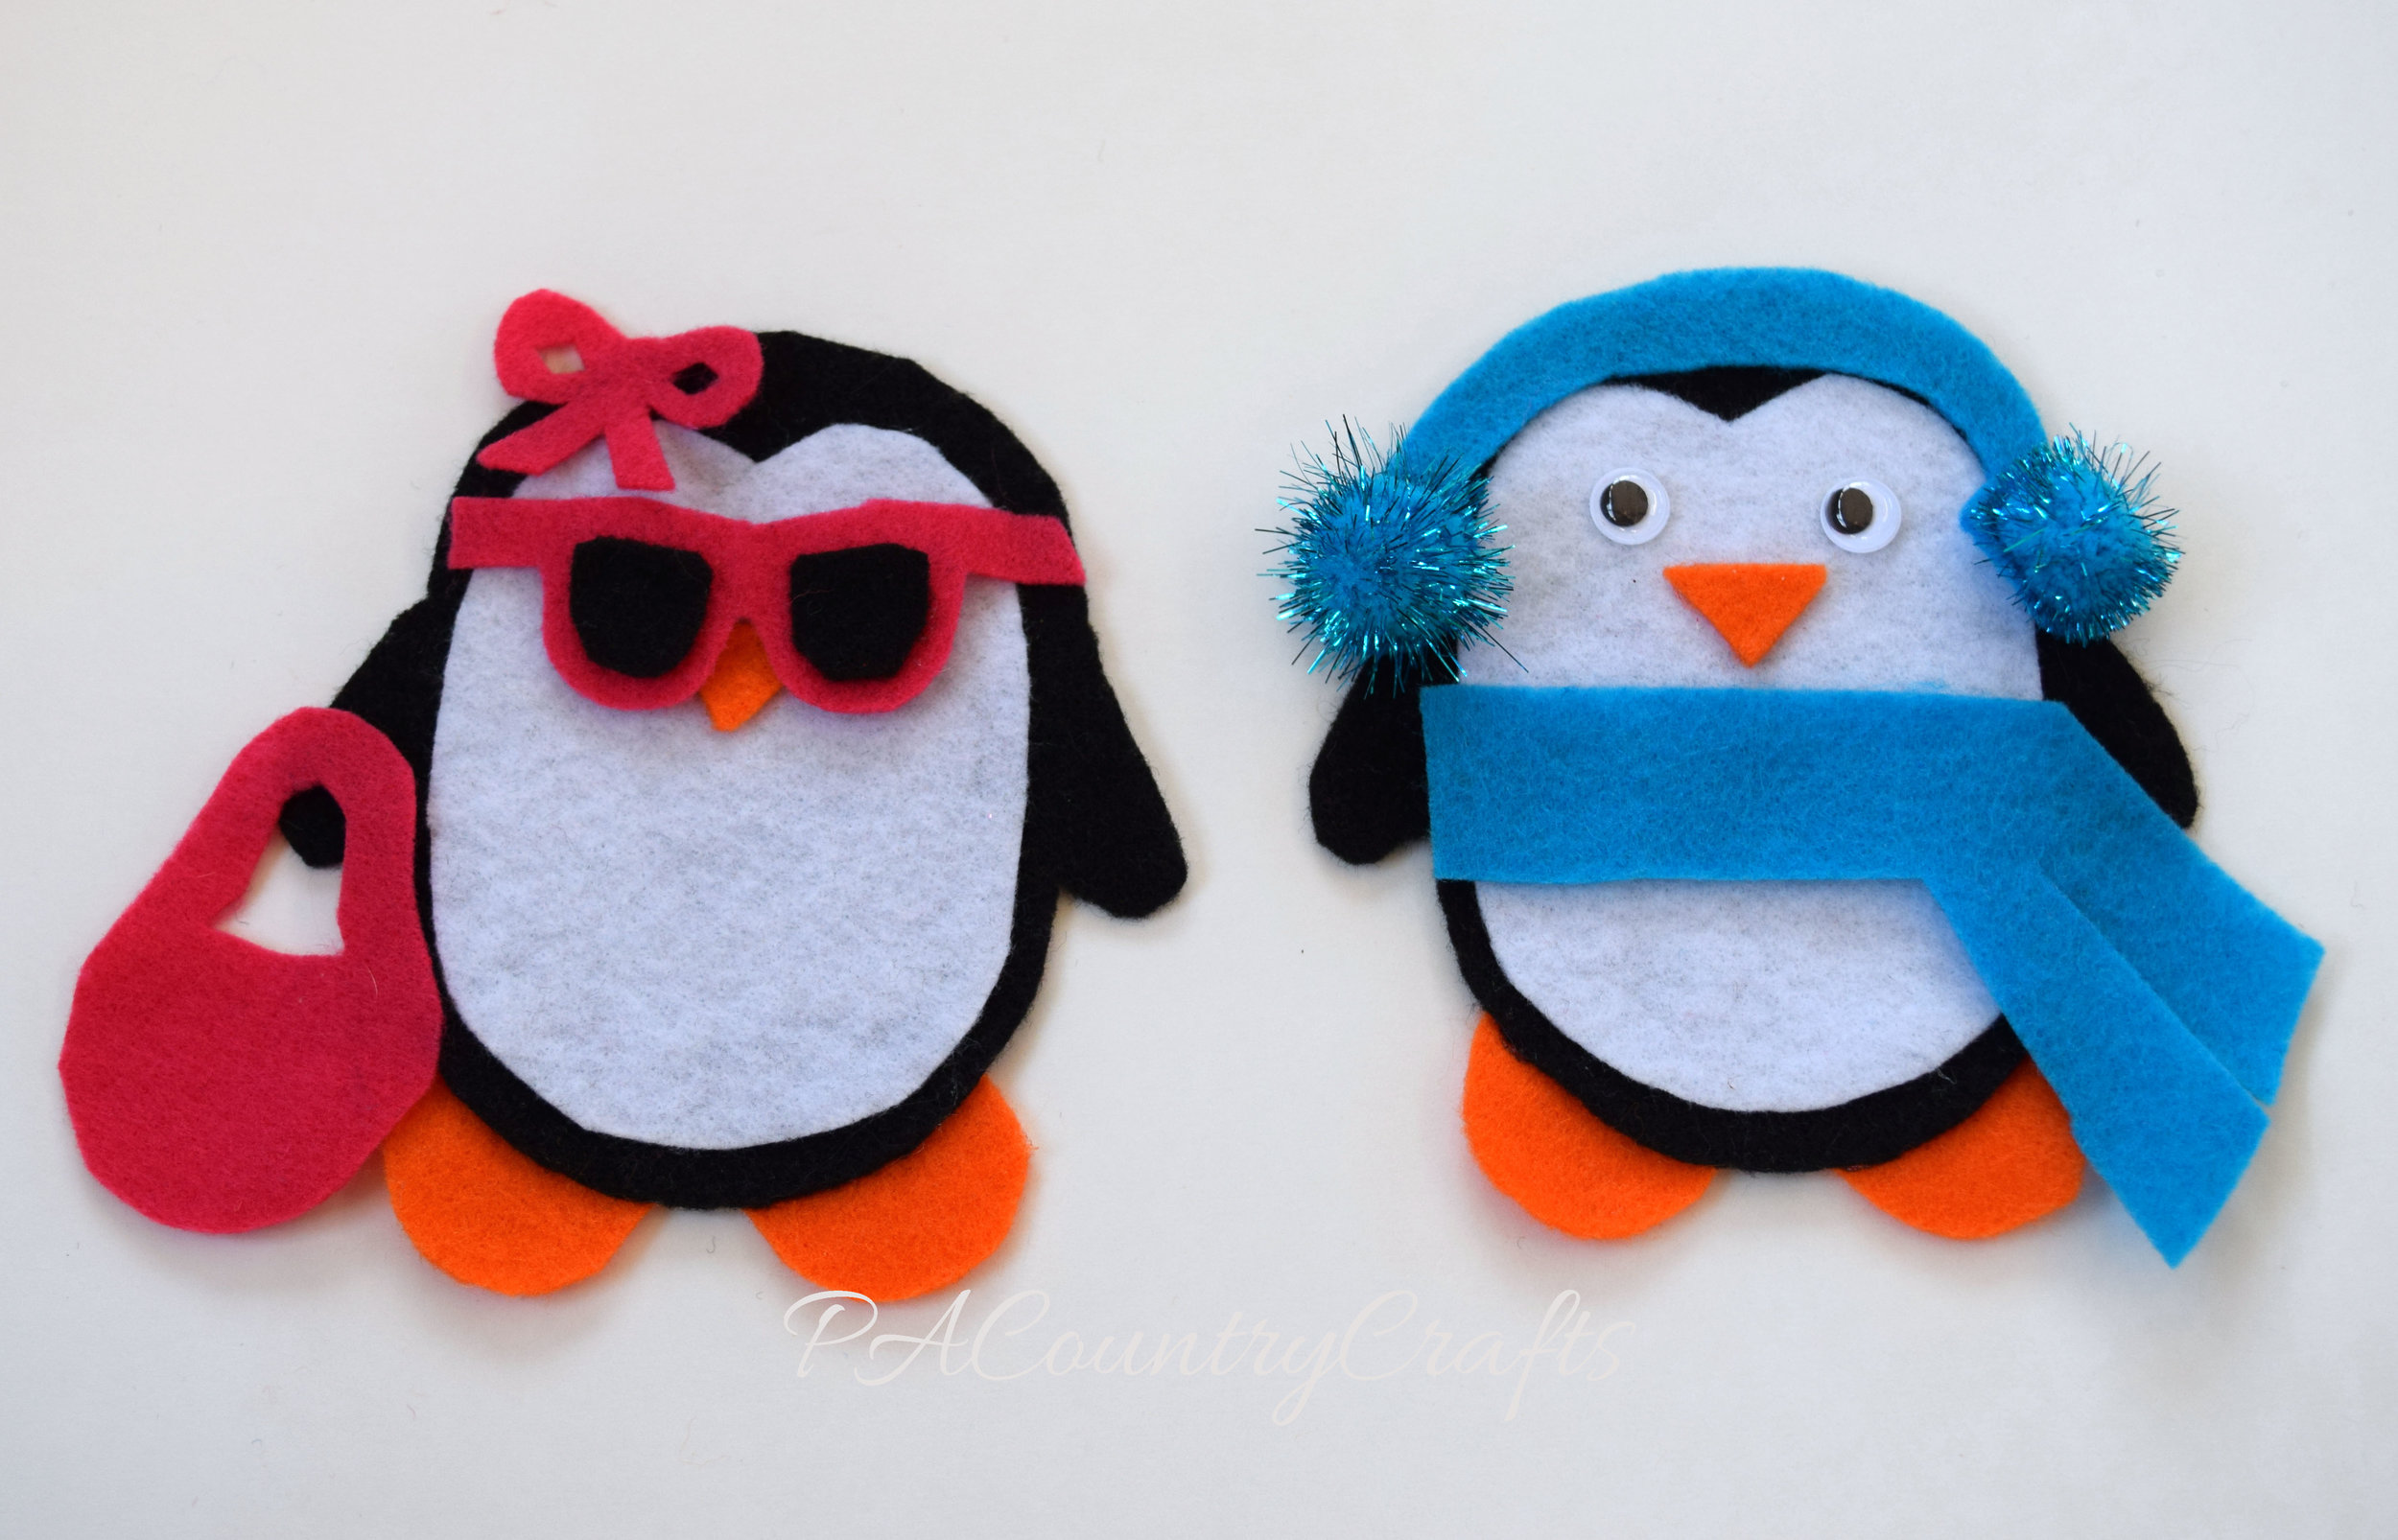 Toddler activity- play dress-up with felt penguins.